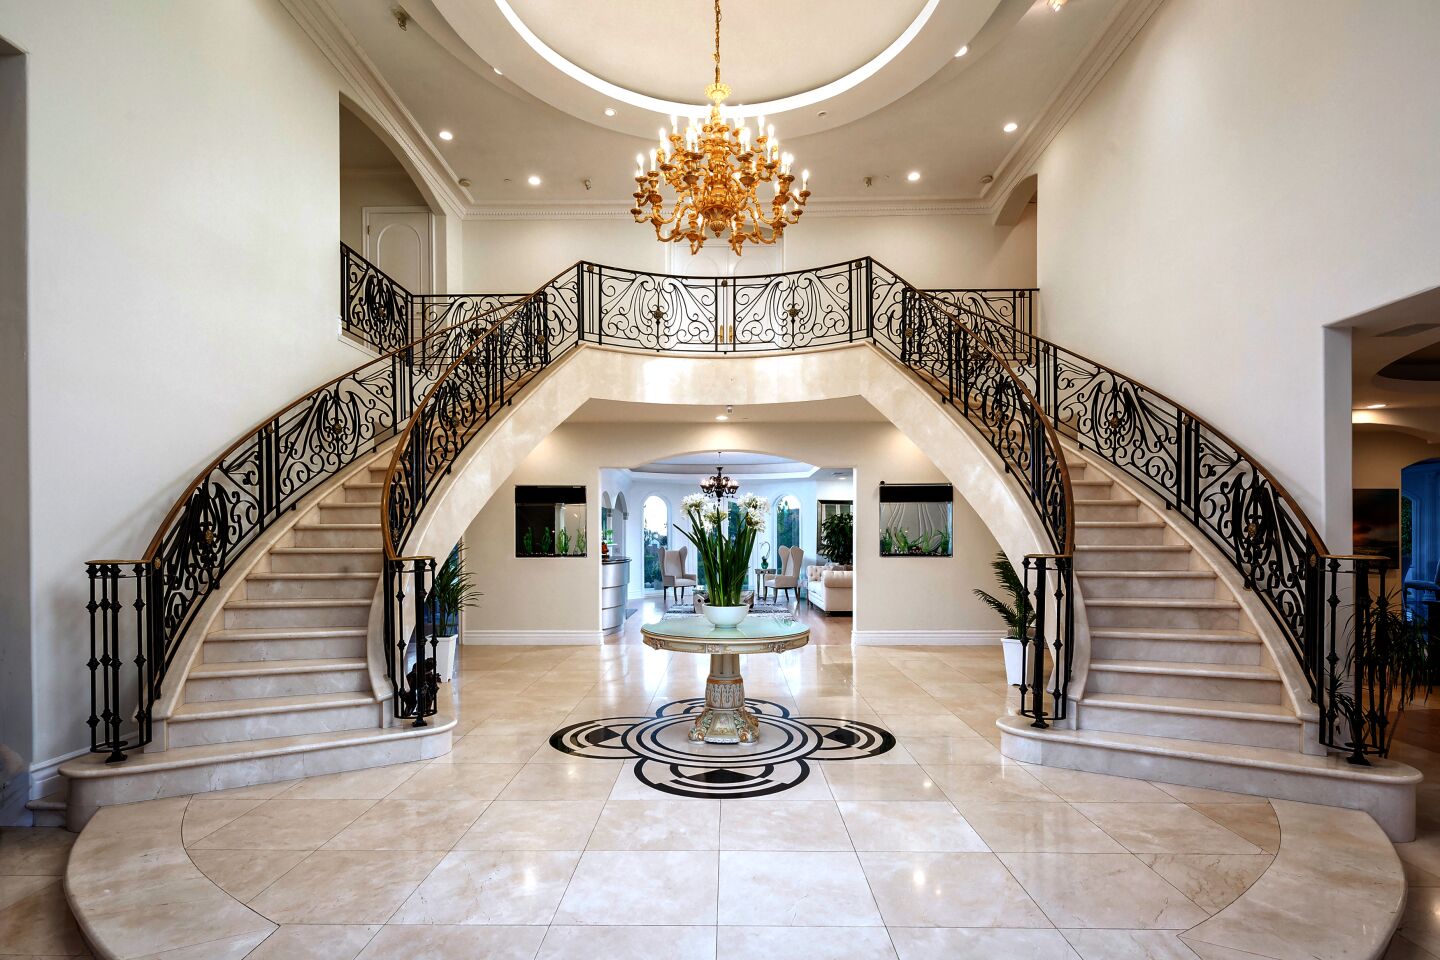 Hungarian curlers György Nagy and Ildikó Szekeres paid $6.1 million for this mansion in Bel-Air. The home has a grand foyer with a sweeping staircase.